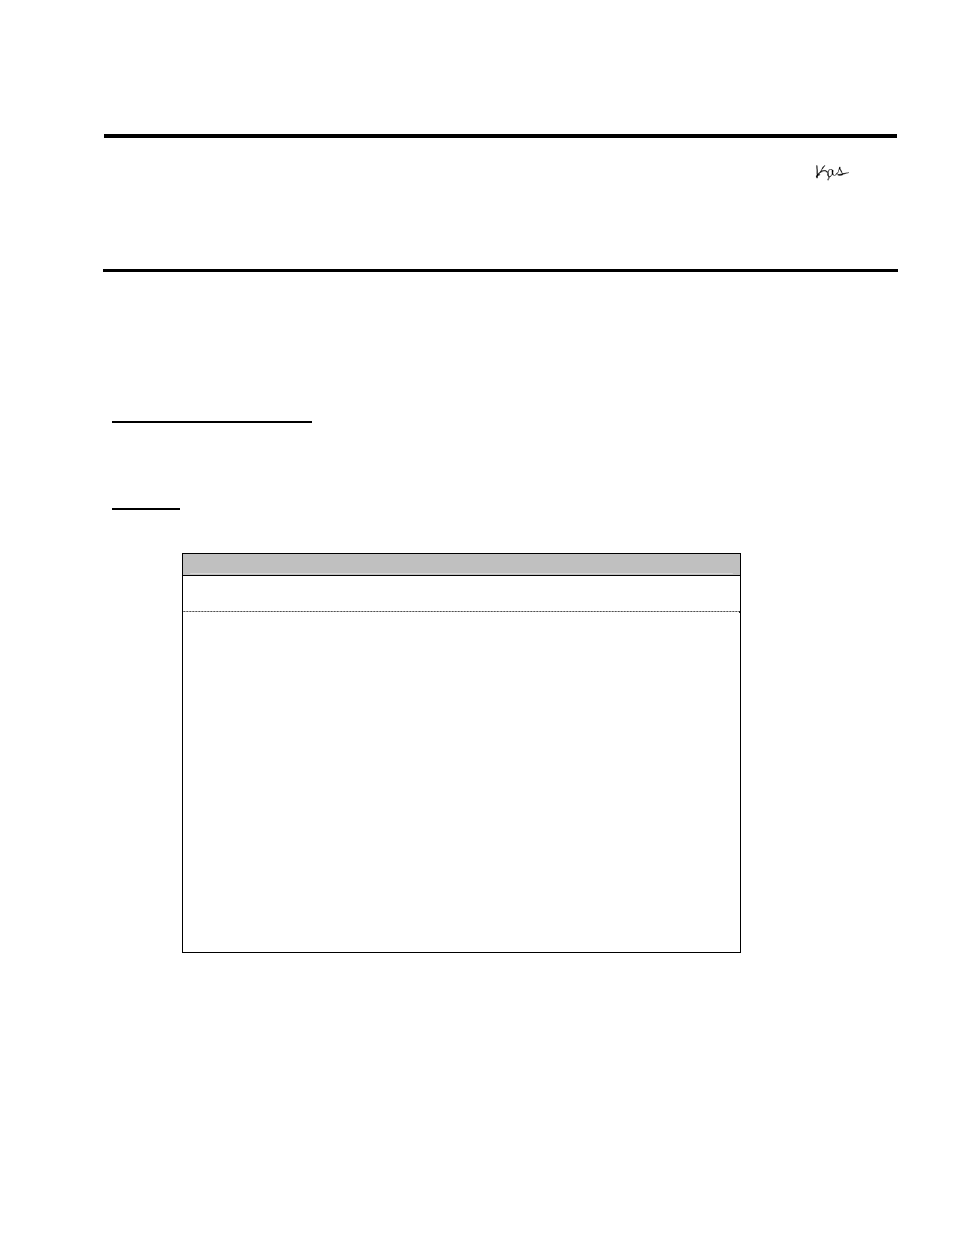 Epson WorkForce 600 Series User Manual | 5 pages